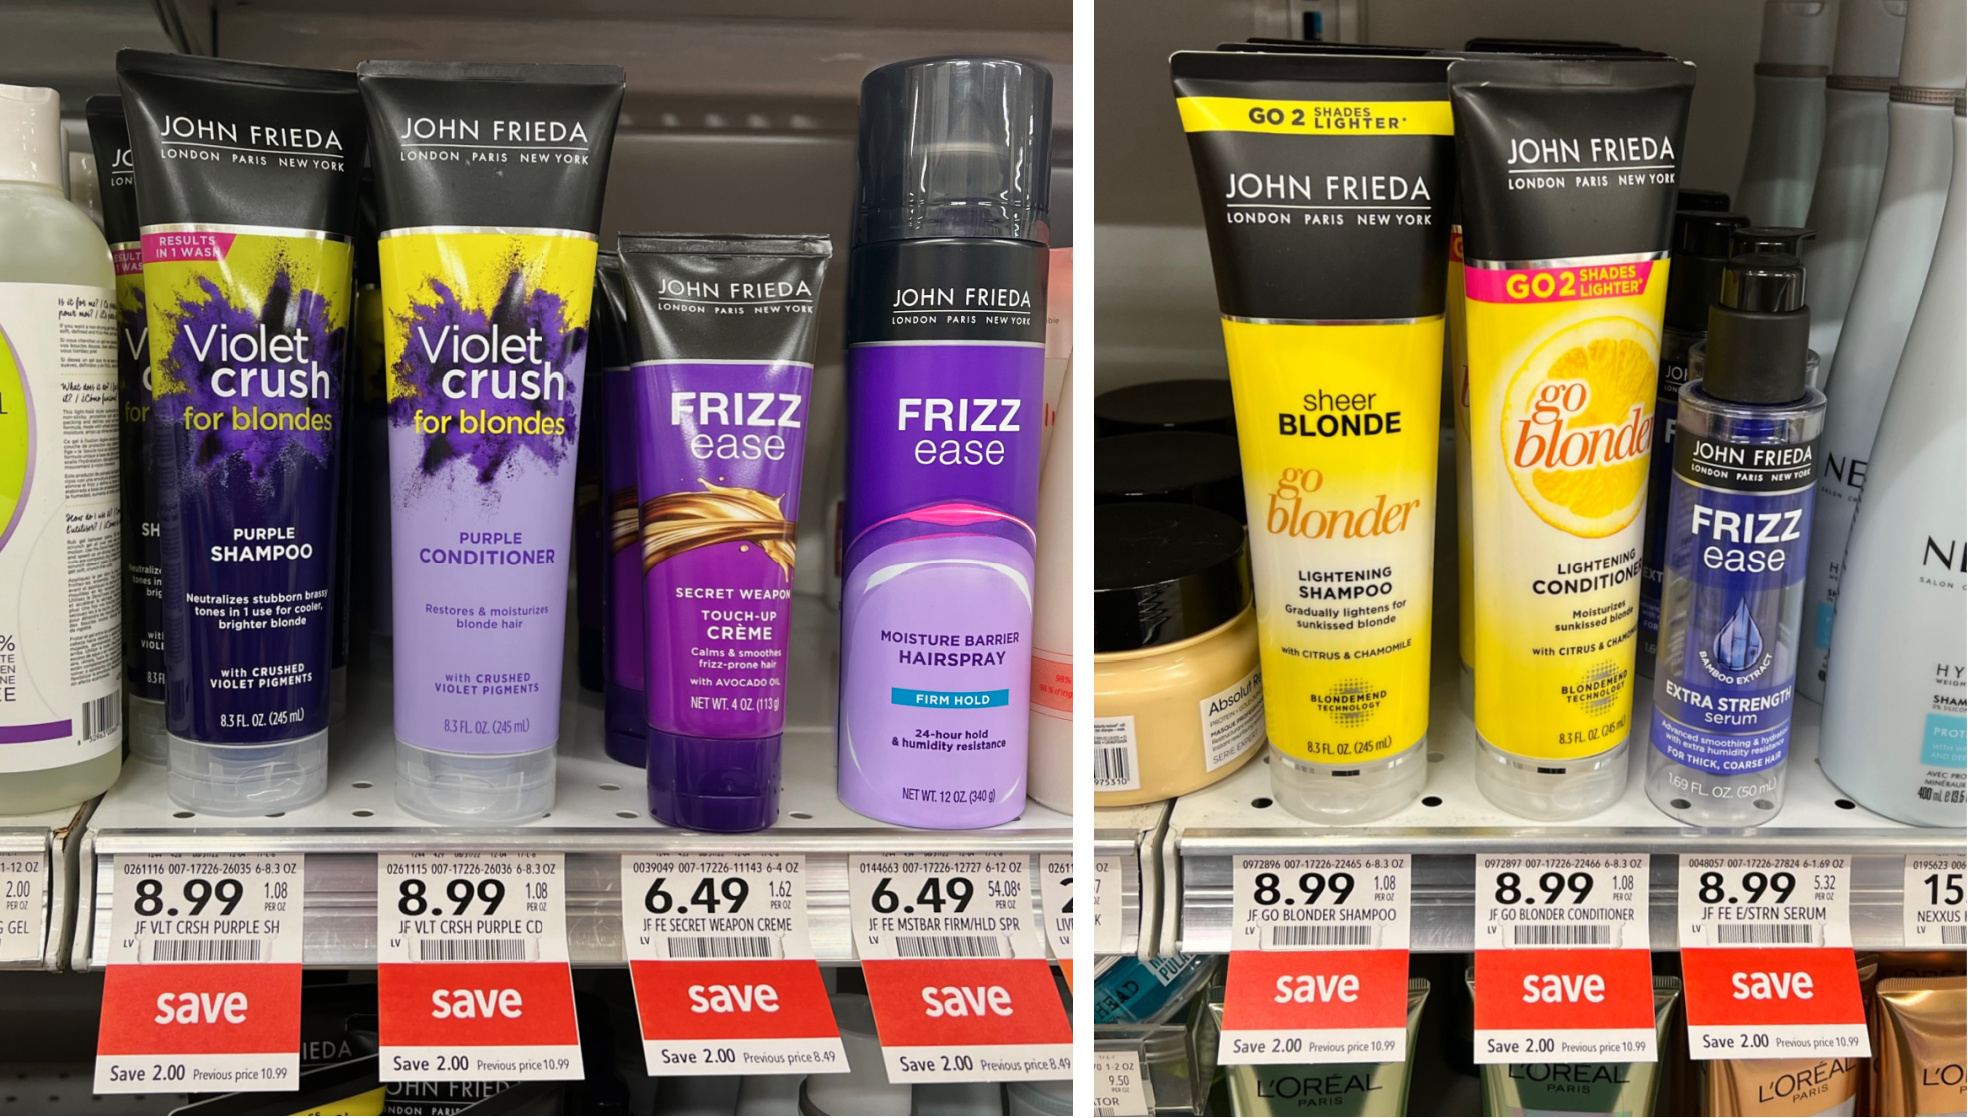 John Frieda Hair Care As Low As $ At Publix - iHeartPublix